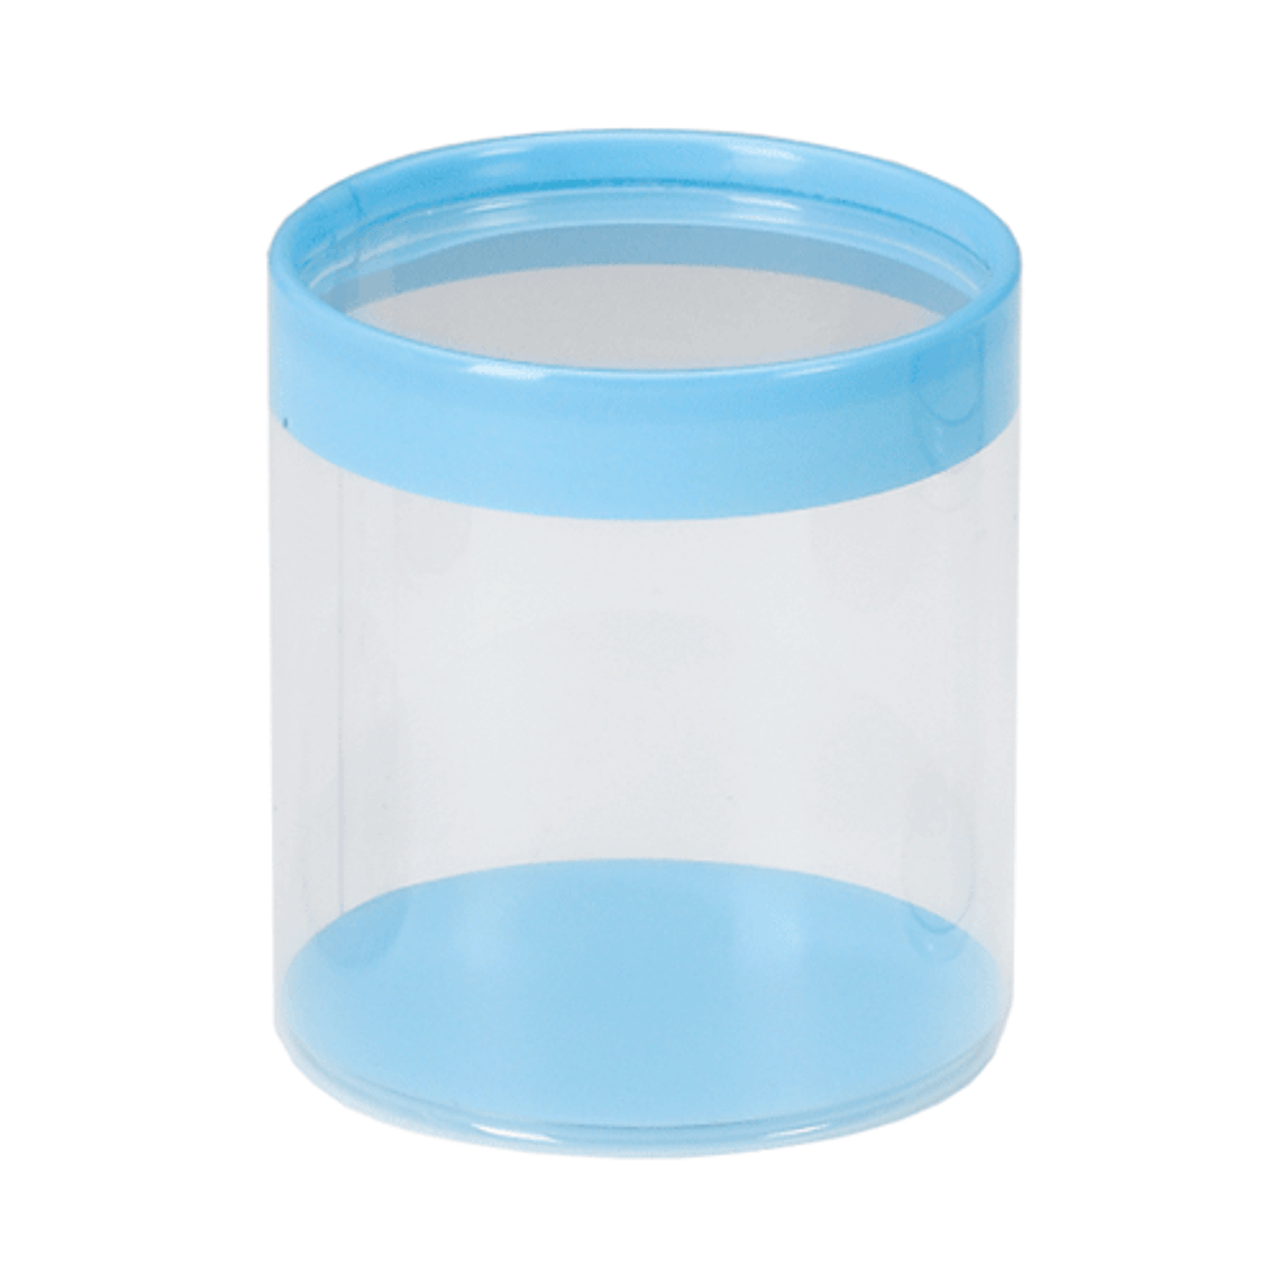 Preassembled Cylinder Boxes - Blue (3 sizes)